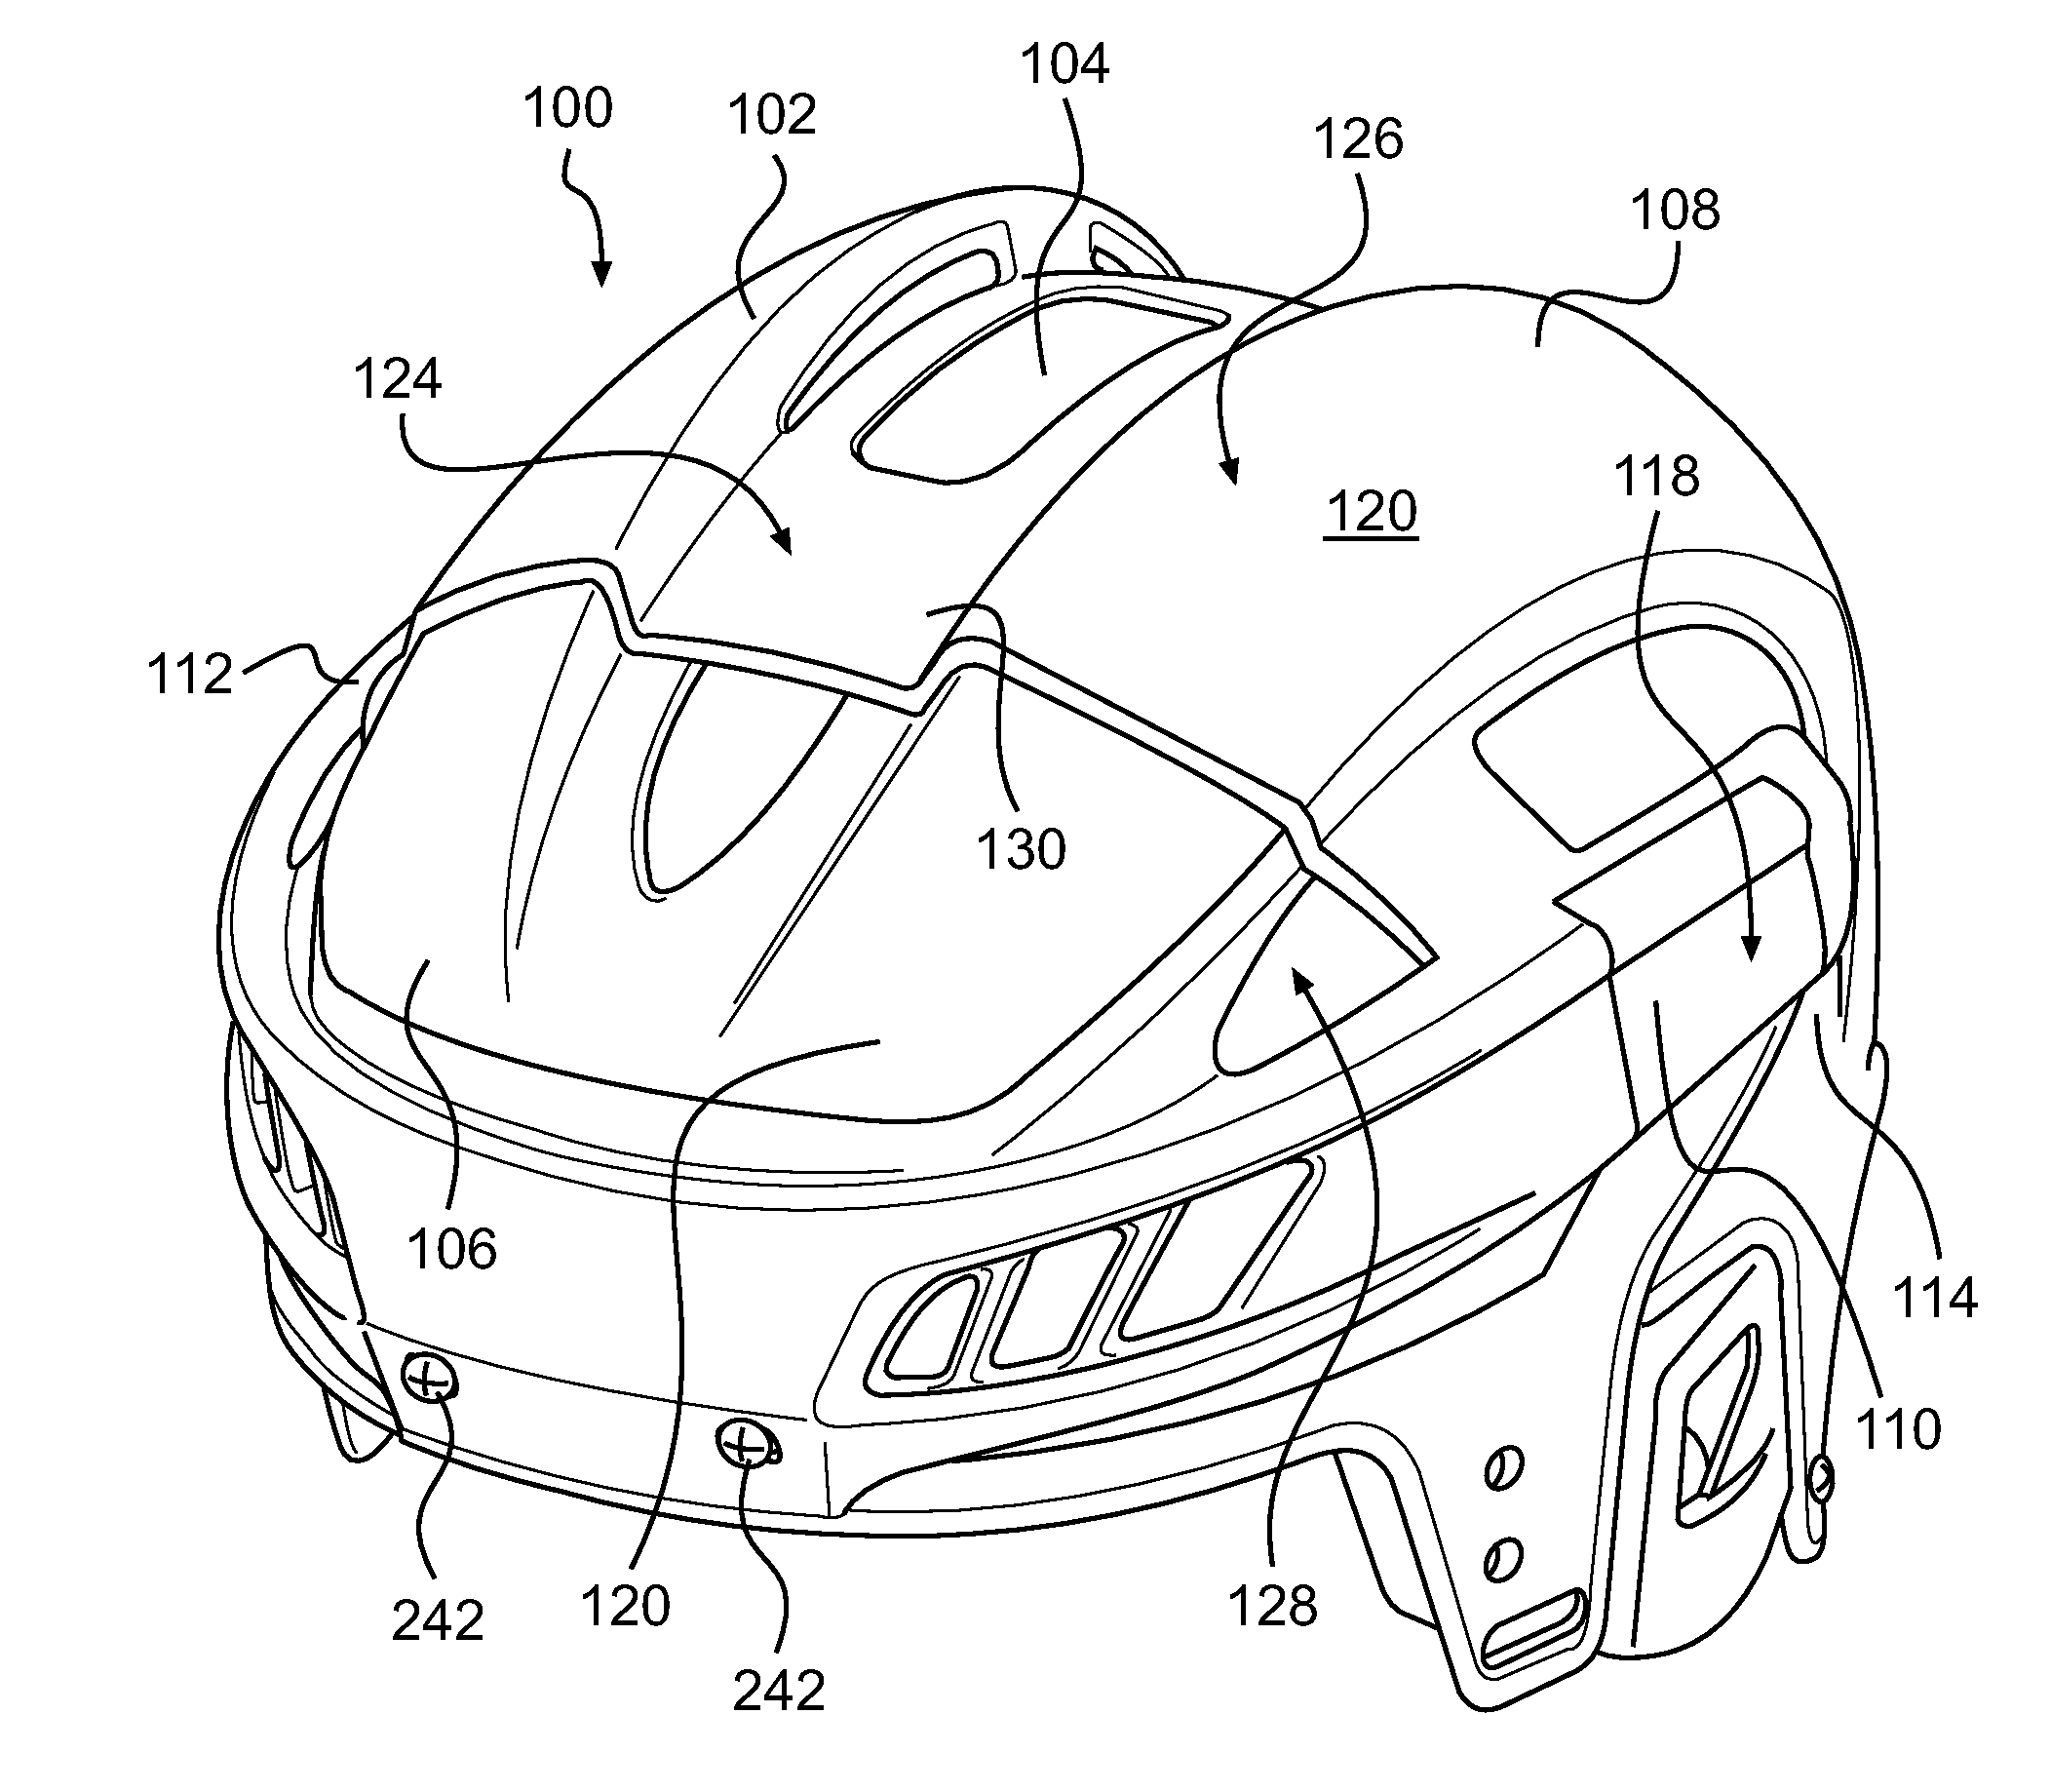 Helmet with rigid shell and adjustable liner